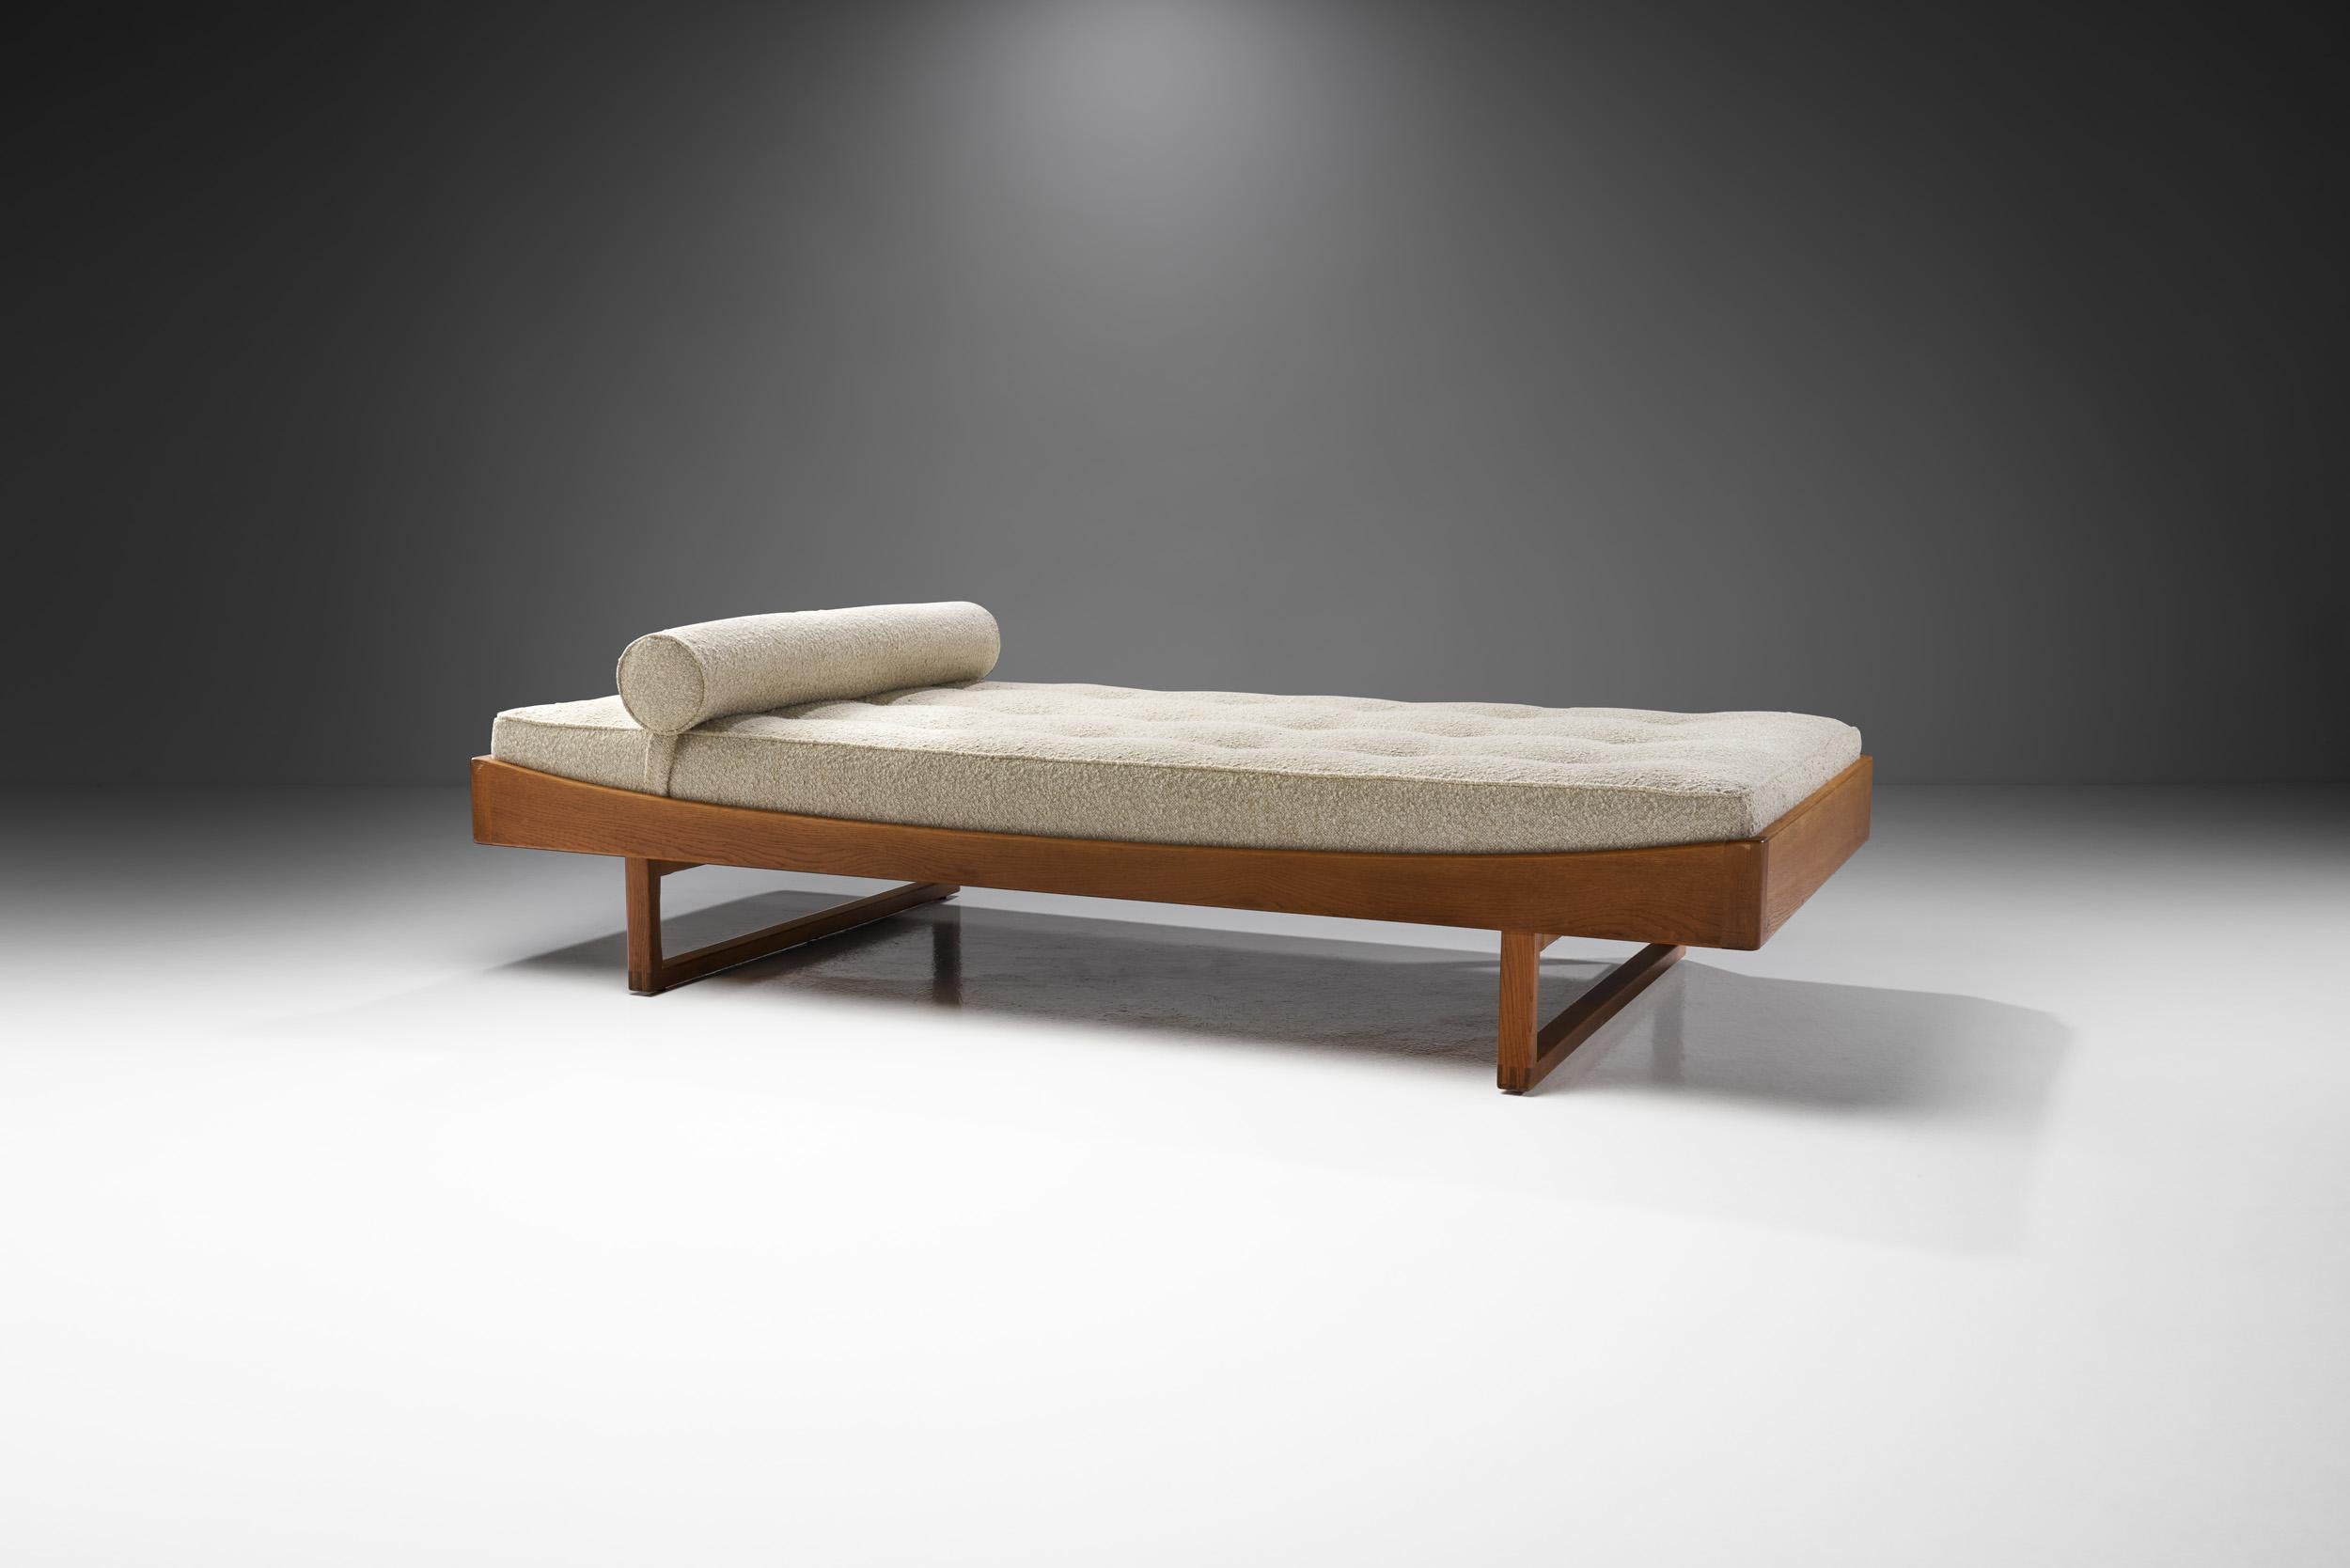 This gorgeous oak daybed model by the Danish furniture maker Bernhard Pedersen og Søn was inspired by classic Danish furniture design and simplicity.

The streamlined solid wood frame features a curvy top and geometric, so-called runner legs. From